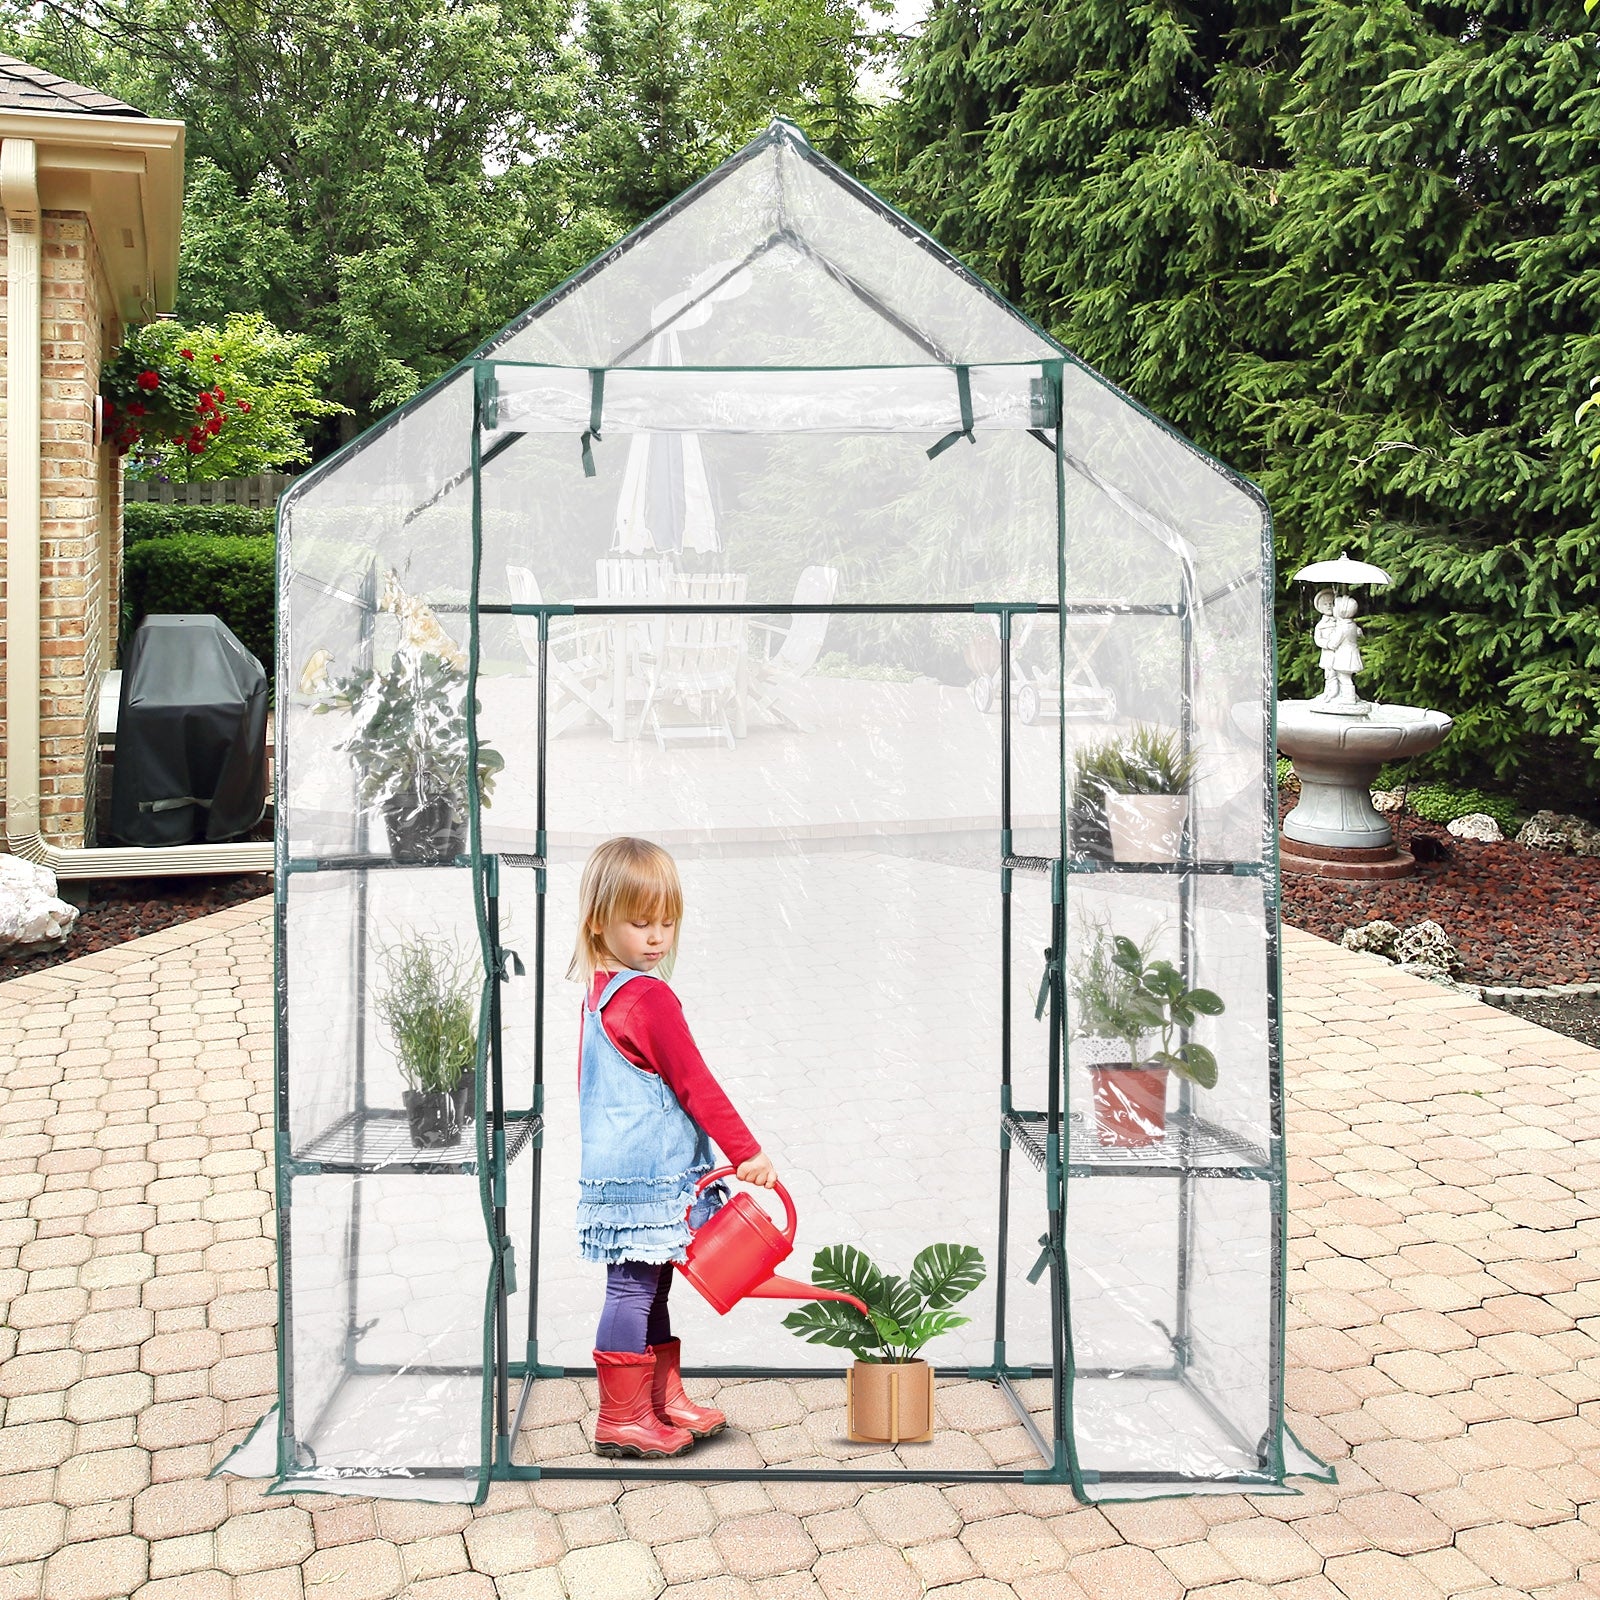 Portable Outdoor 4 Shelves Greenhouse - Direct by Wilsons Home Store